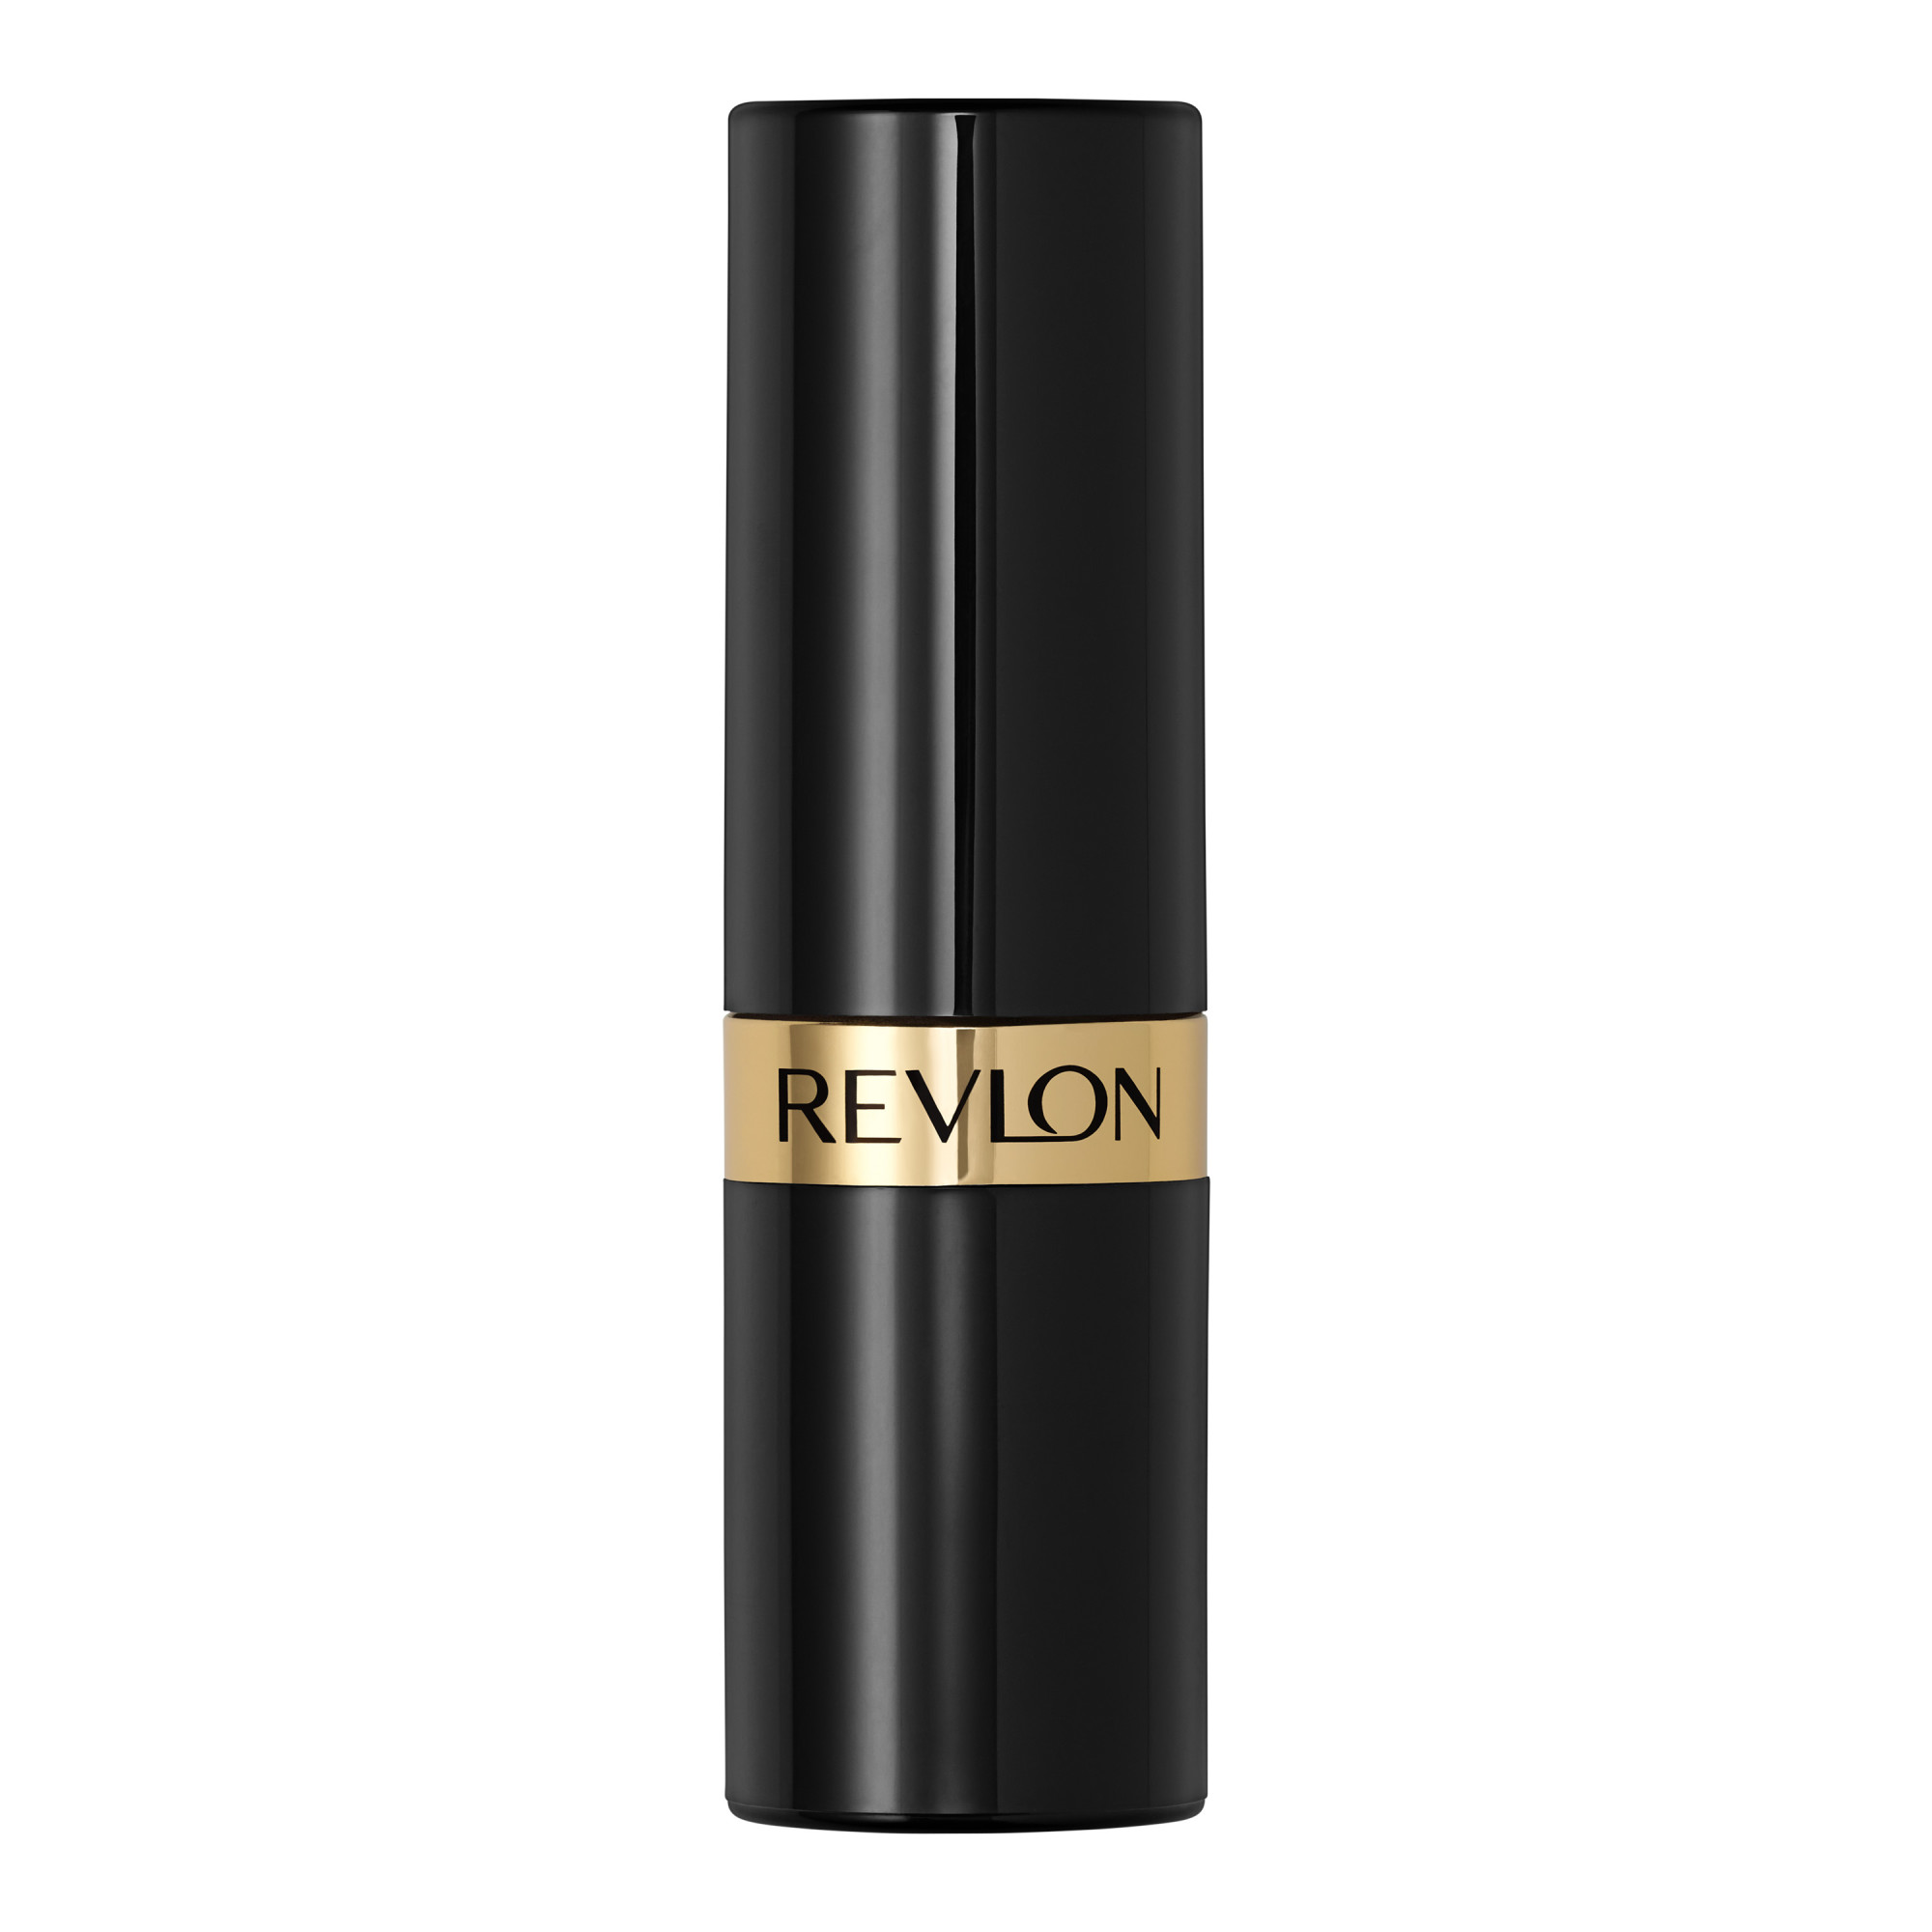 Revlon Super Lustrous Pearl Lipstick, Creamy Formula, 520 Wine With Everything, 0.15 oz - image 10 of 10